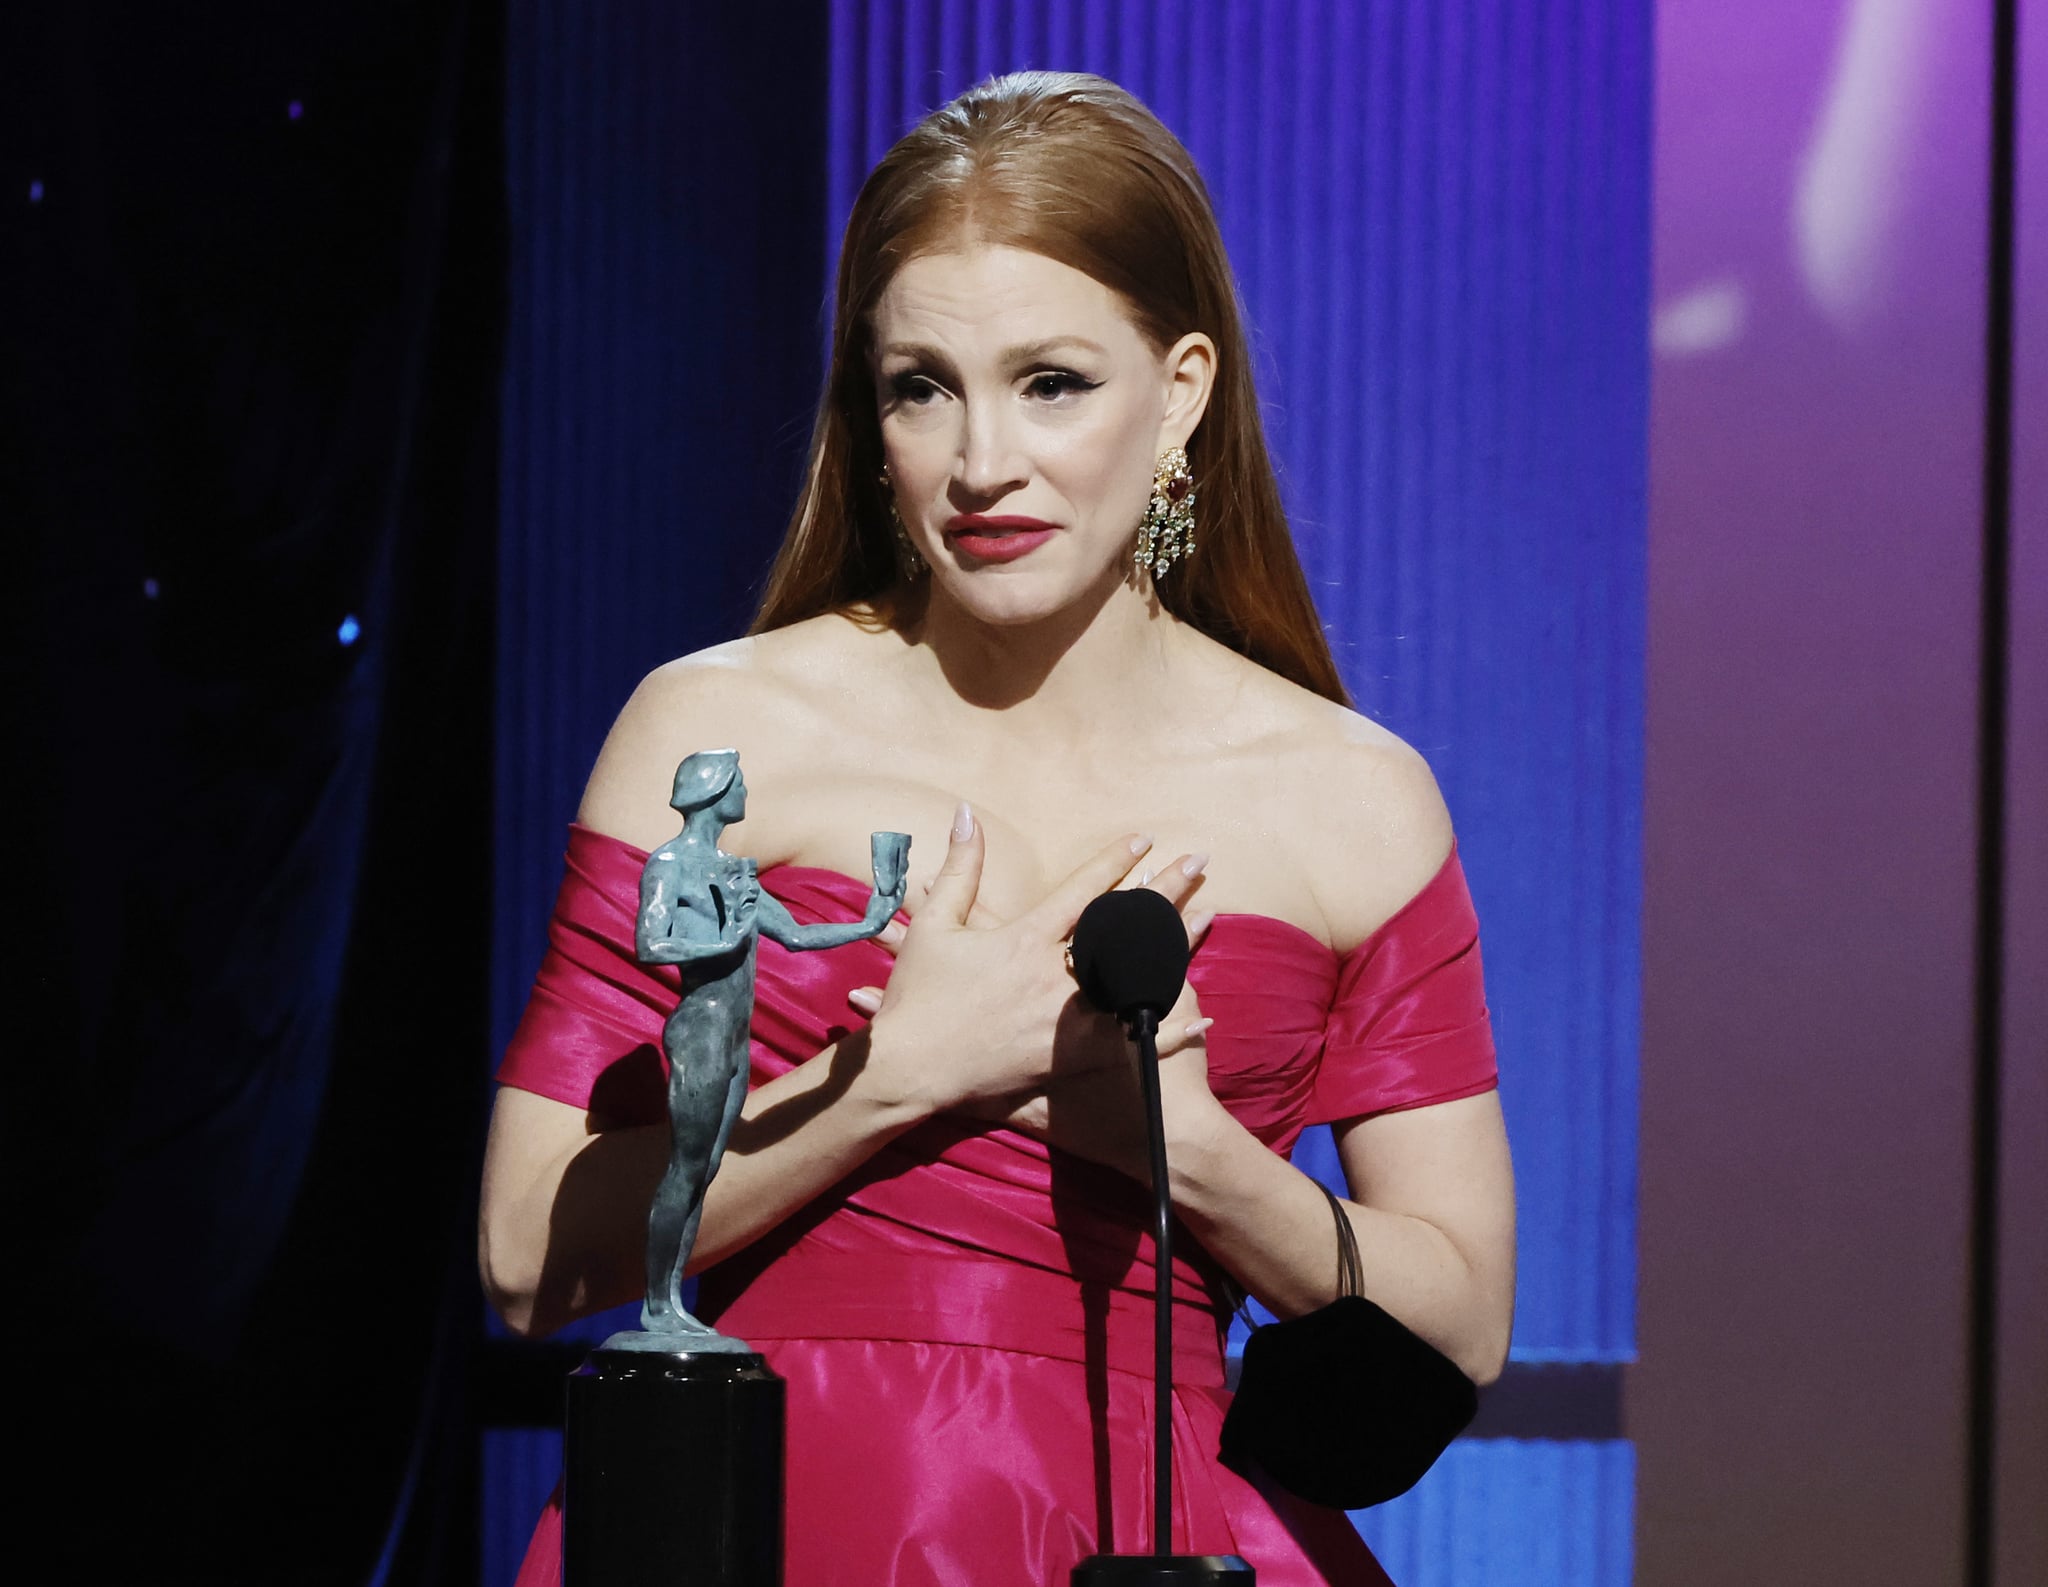 LOS ANGELES, CALIFORNIA - FEBRUARY 26: Jessica Chastain accepts the Outstanding Performance by a Female Actor in a Television Movie or Limited Series award for 